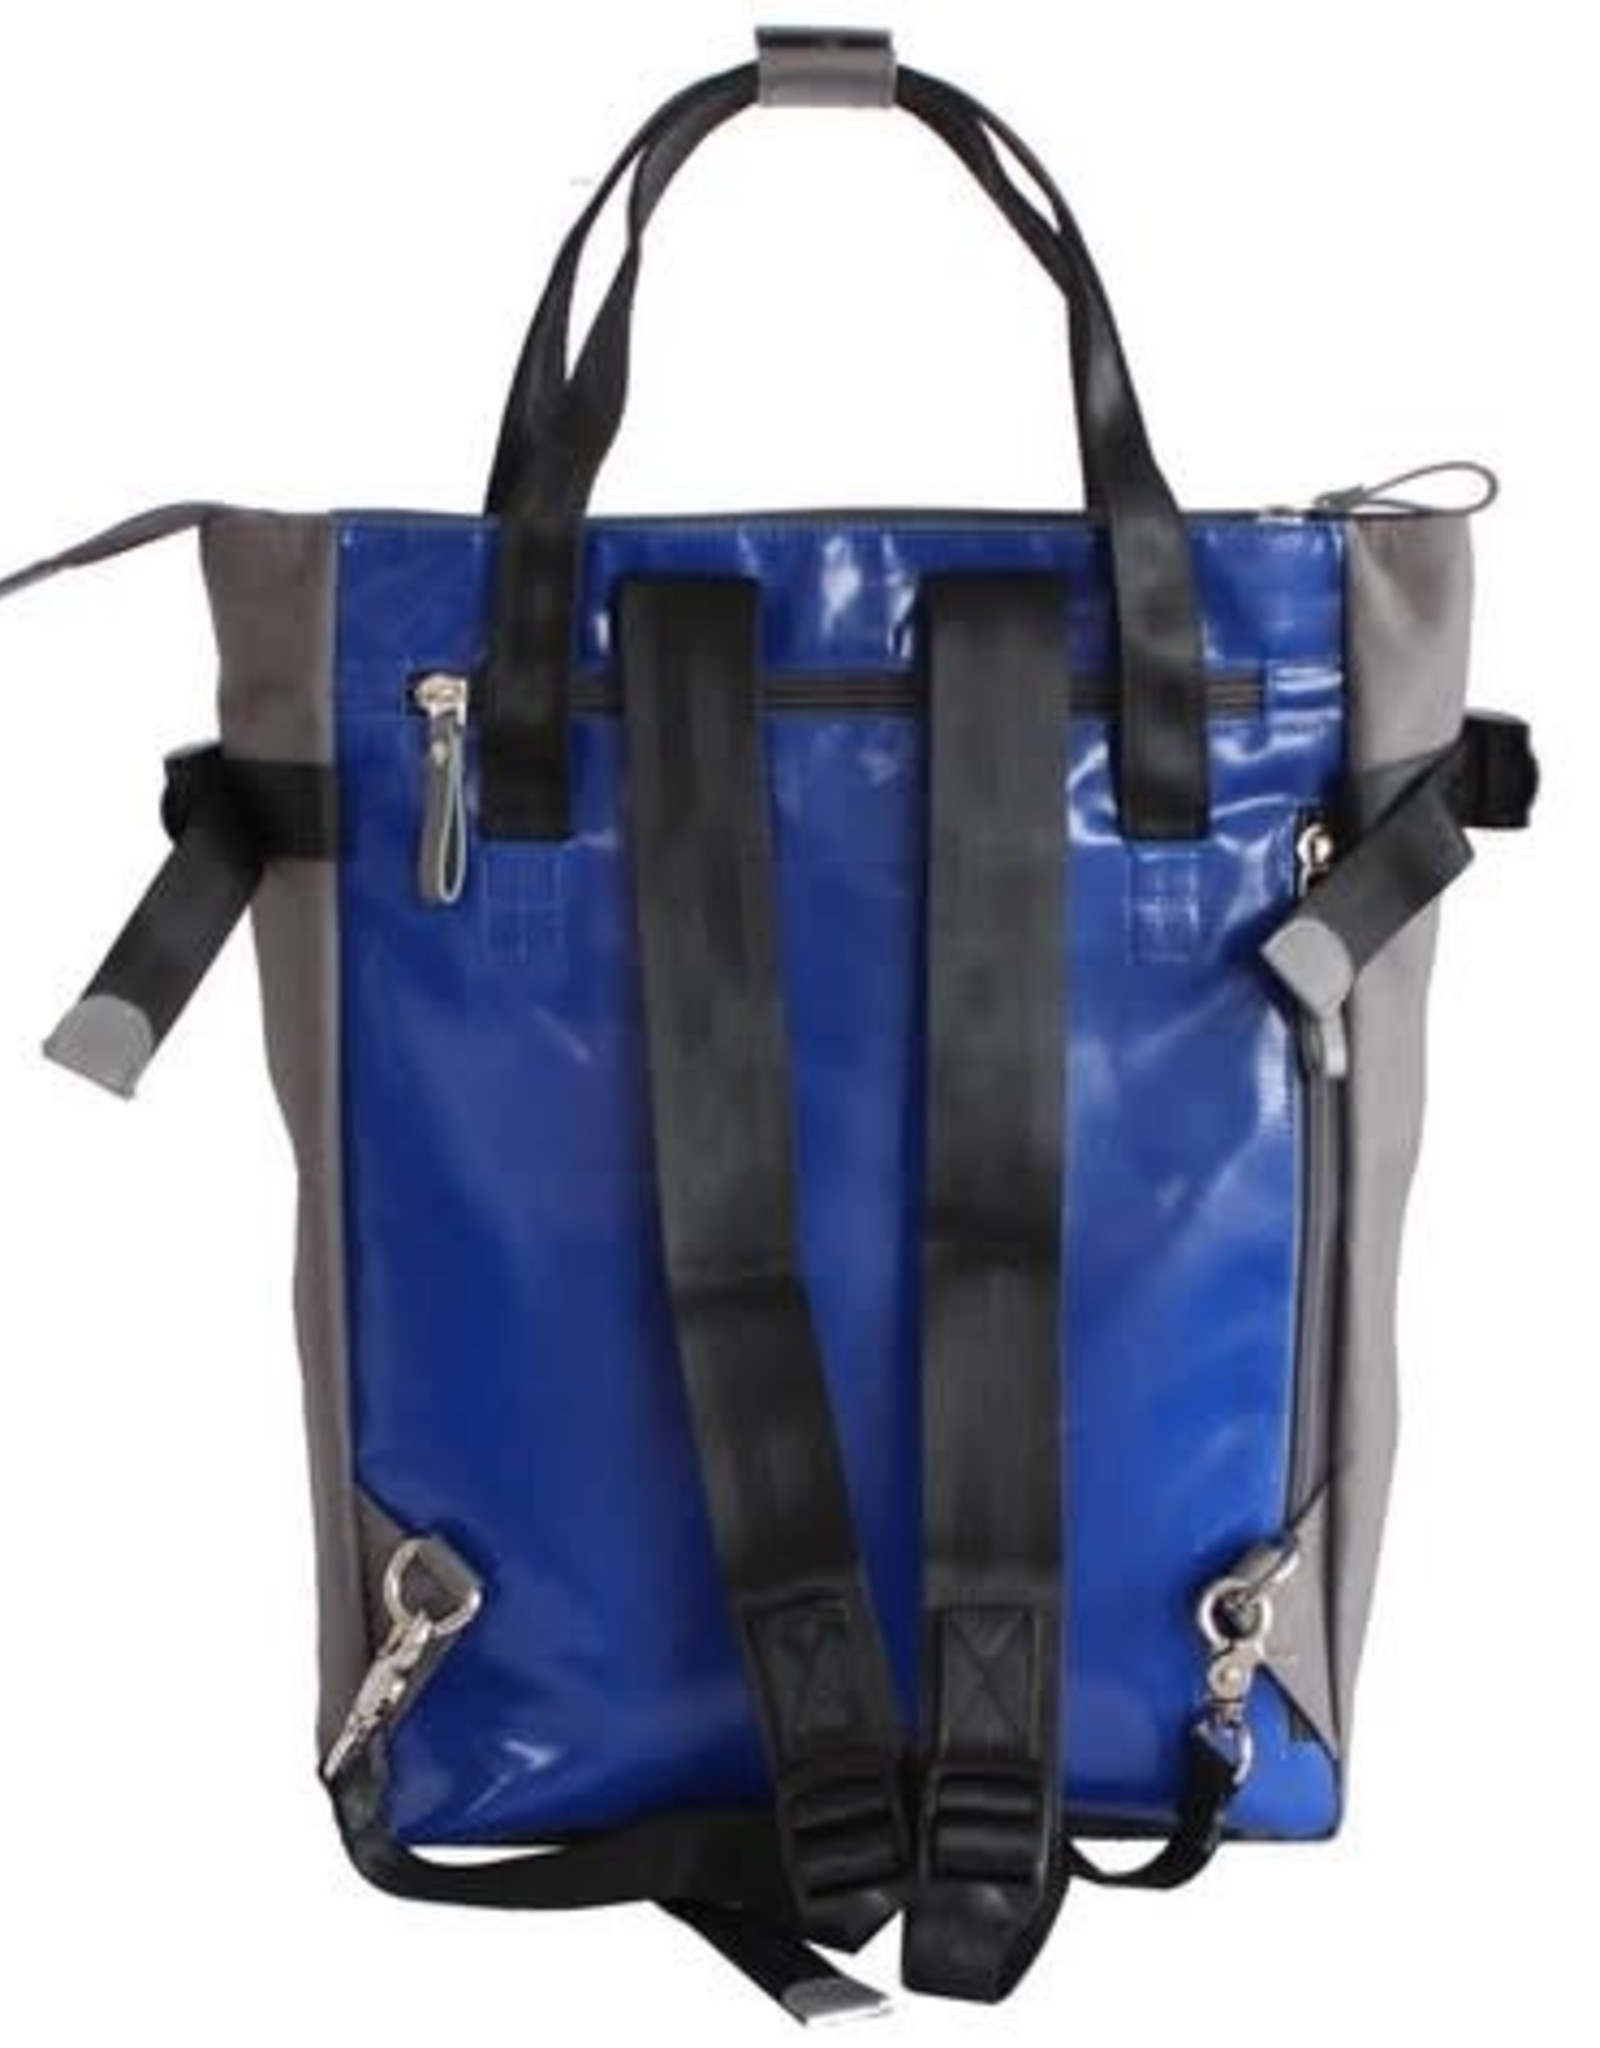 7clouds Mendo Shopper Backpack - 2 color choices